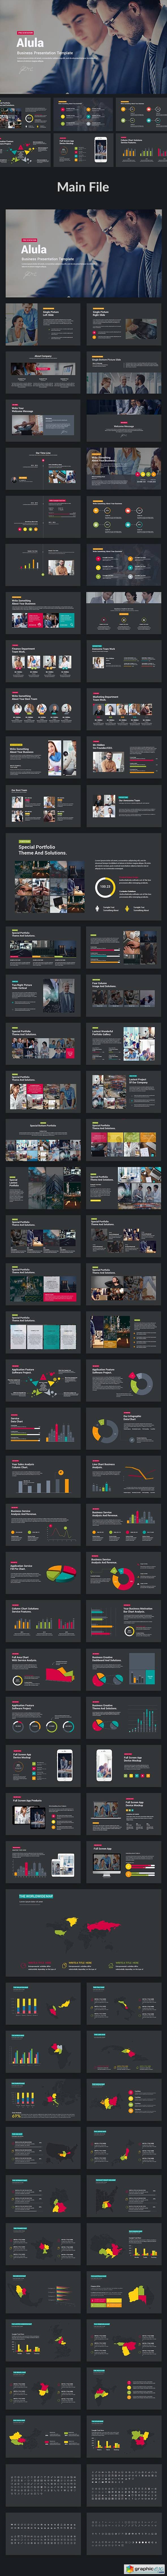 Alula - Business Powerpoint Template